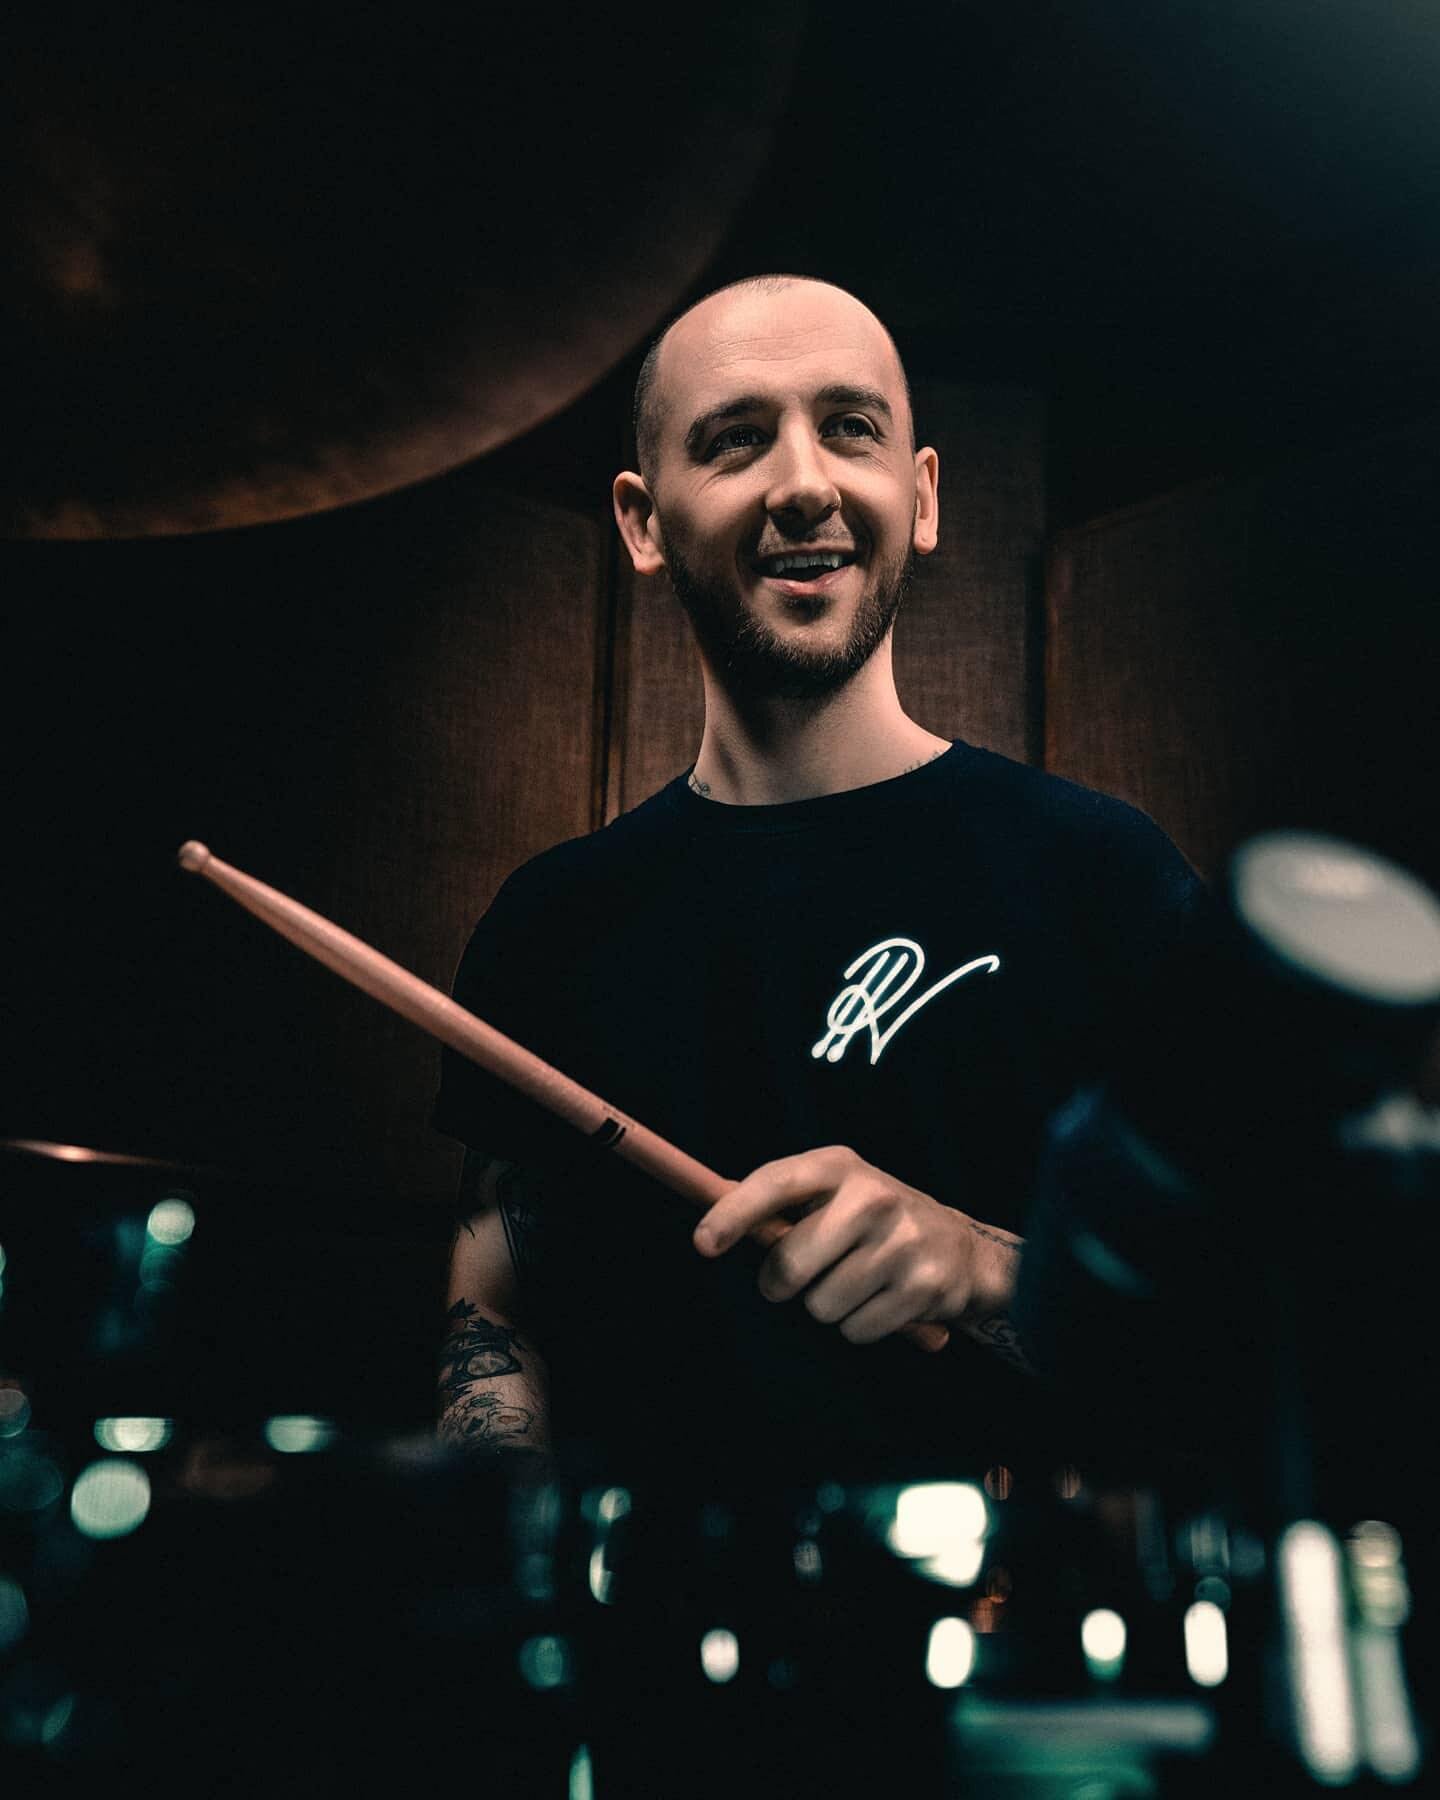 @raynavandel is live streaming NOW on YouTube at Punch Studios! #studioisolation

He&rsquo;s playing drums and taking requests! We&rsquo;ve all got to try and keep morale up, tune in for the next few hours for a bit a fun 🥁
Photo by @dan_oaten 
#liv